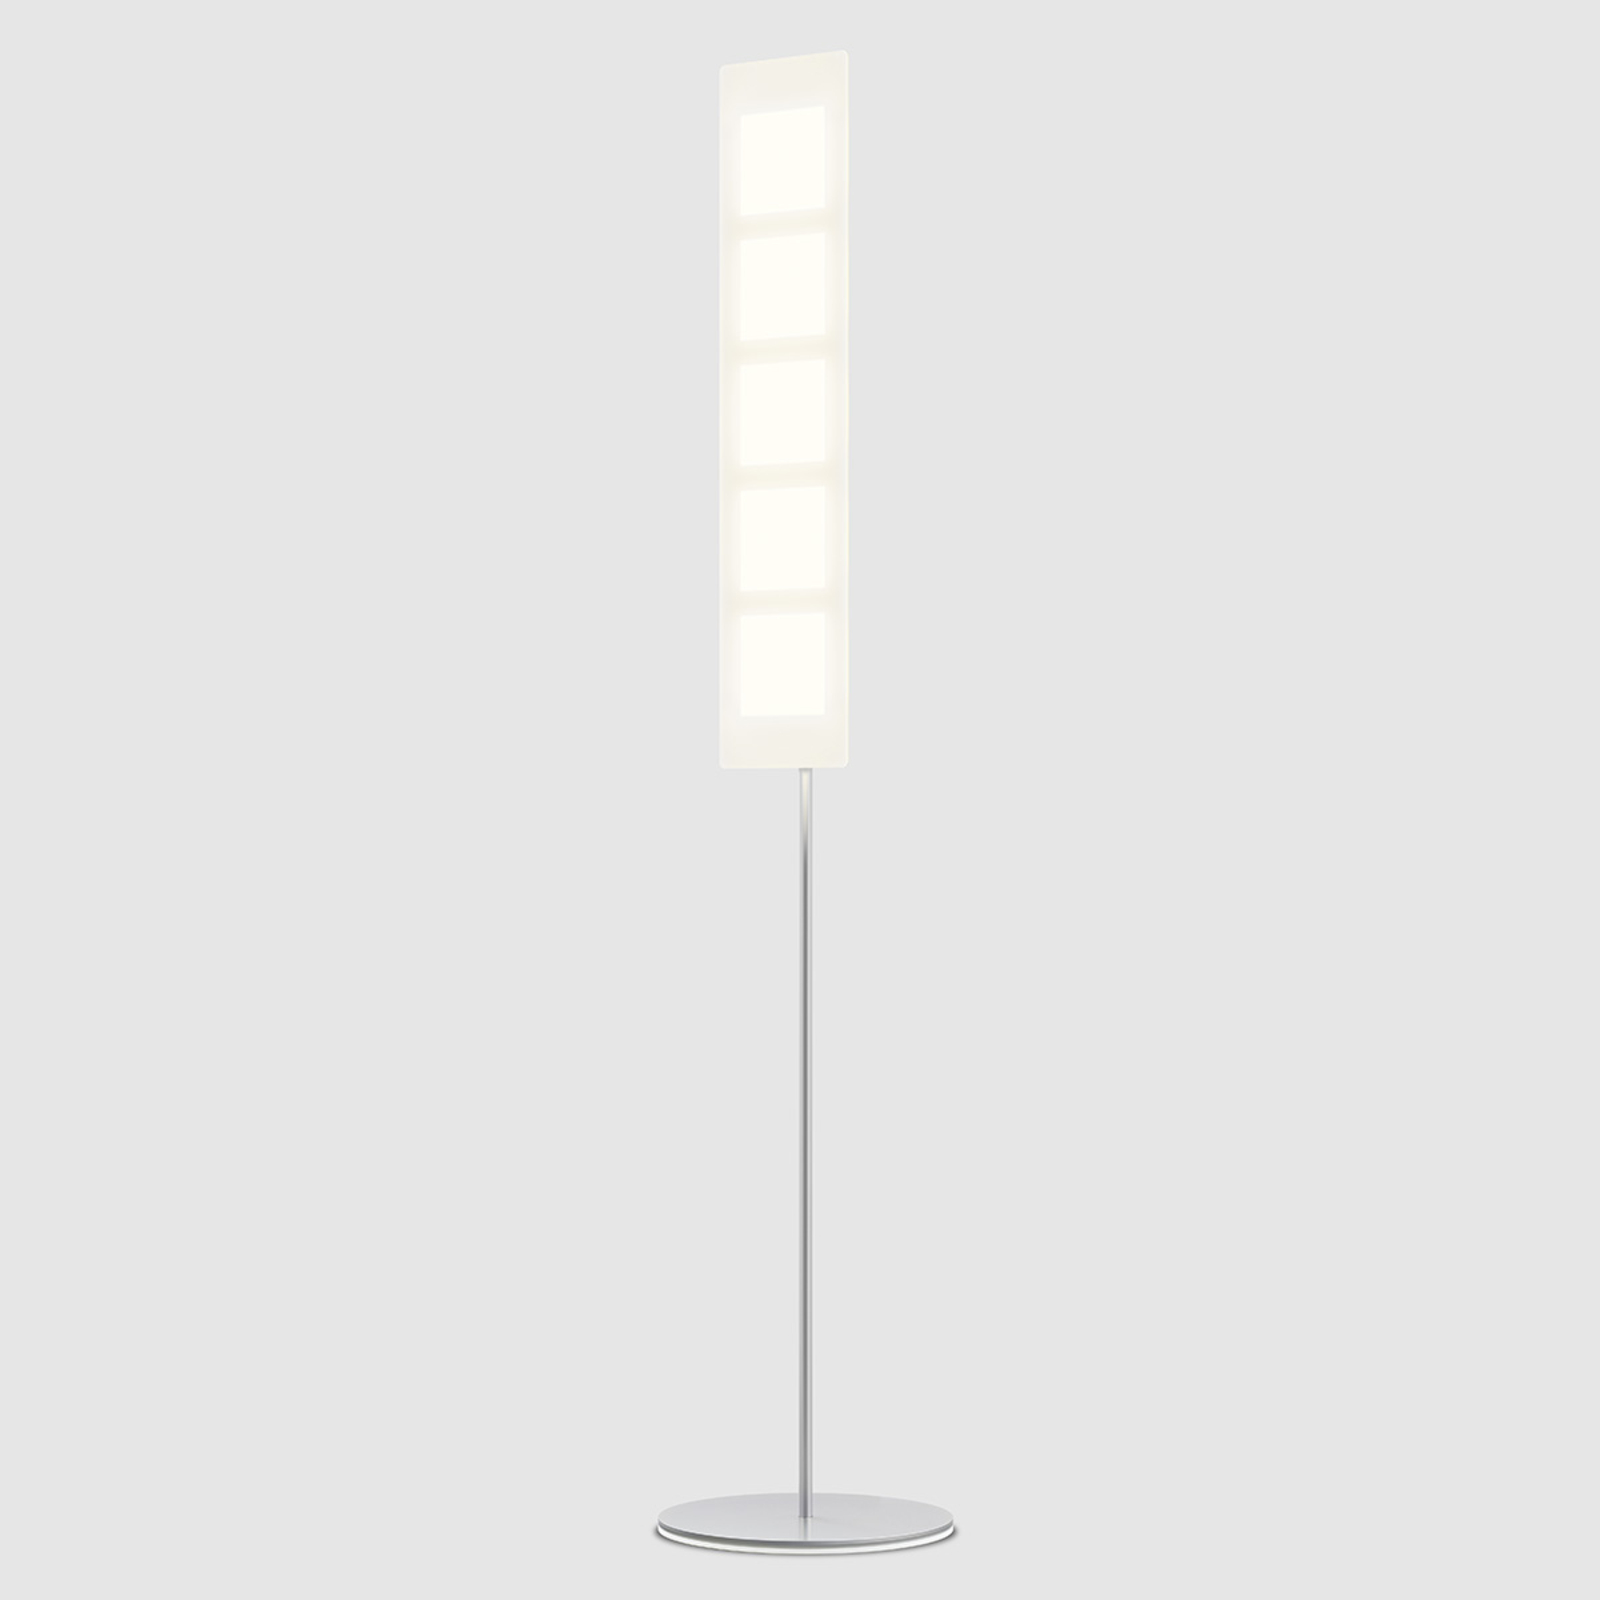 Made in Germany - OMLED One f5 floor lamp black